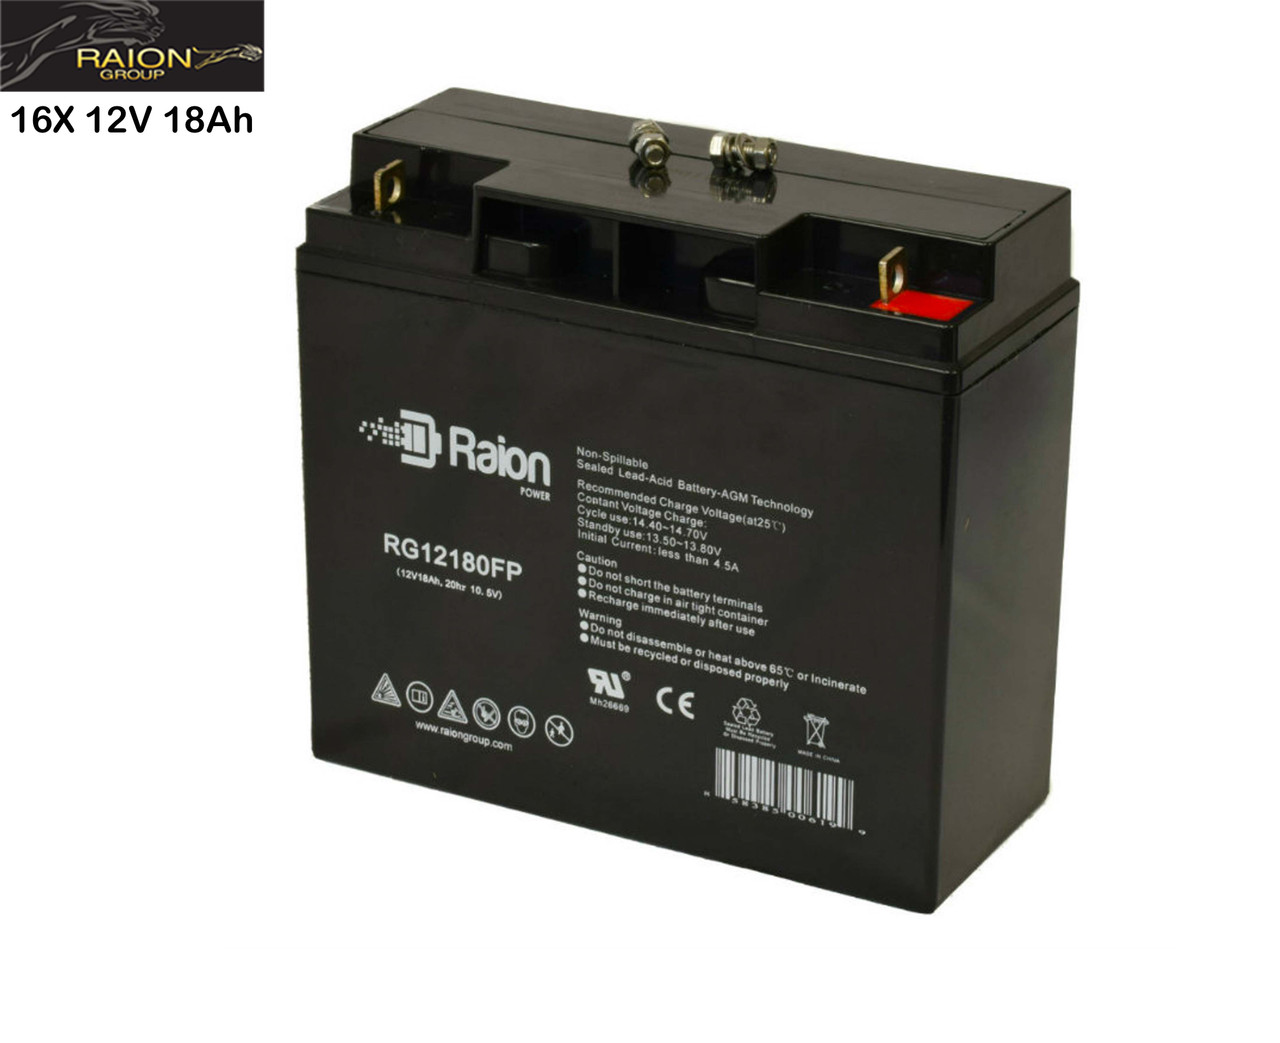 Raion Power Replacement 12V 18Ah RG12180FP Battery for Fujifilm FCR Go - 16 Pack